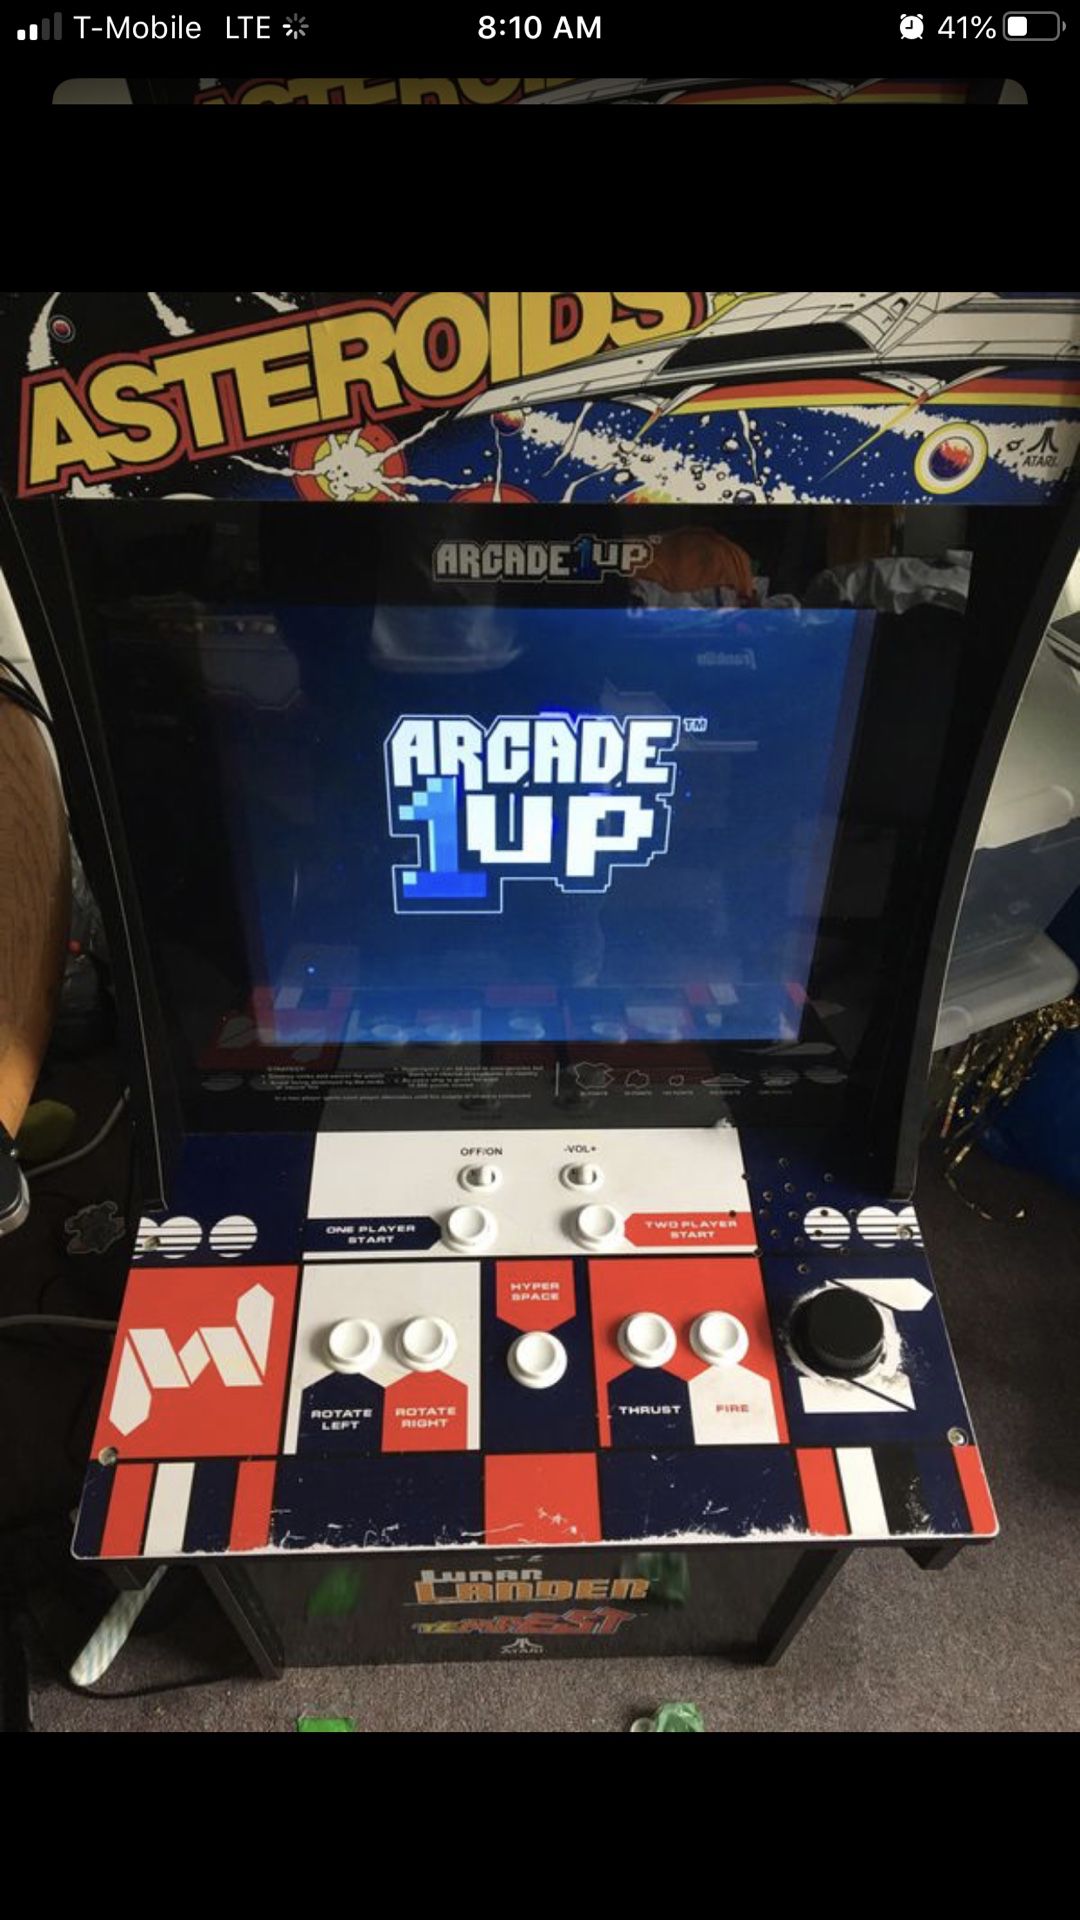 Astroid arcade game Life-size